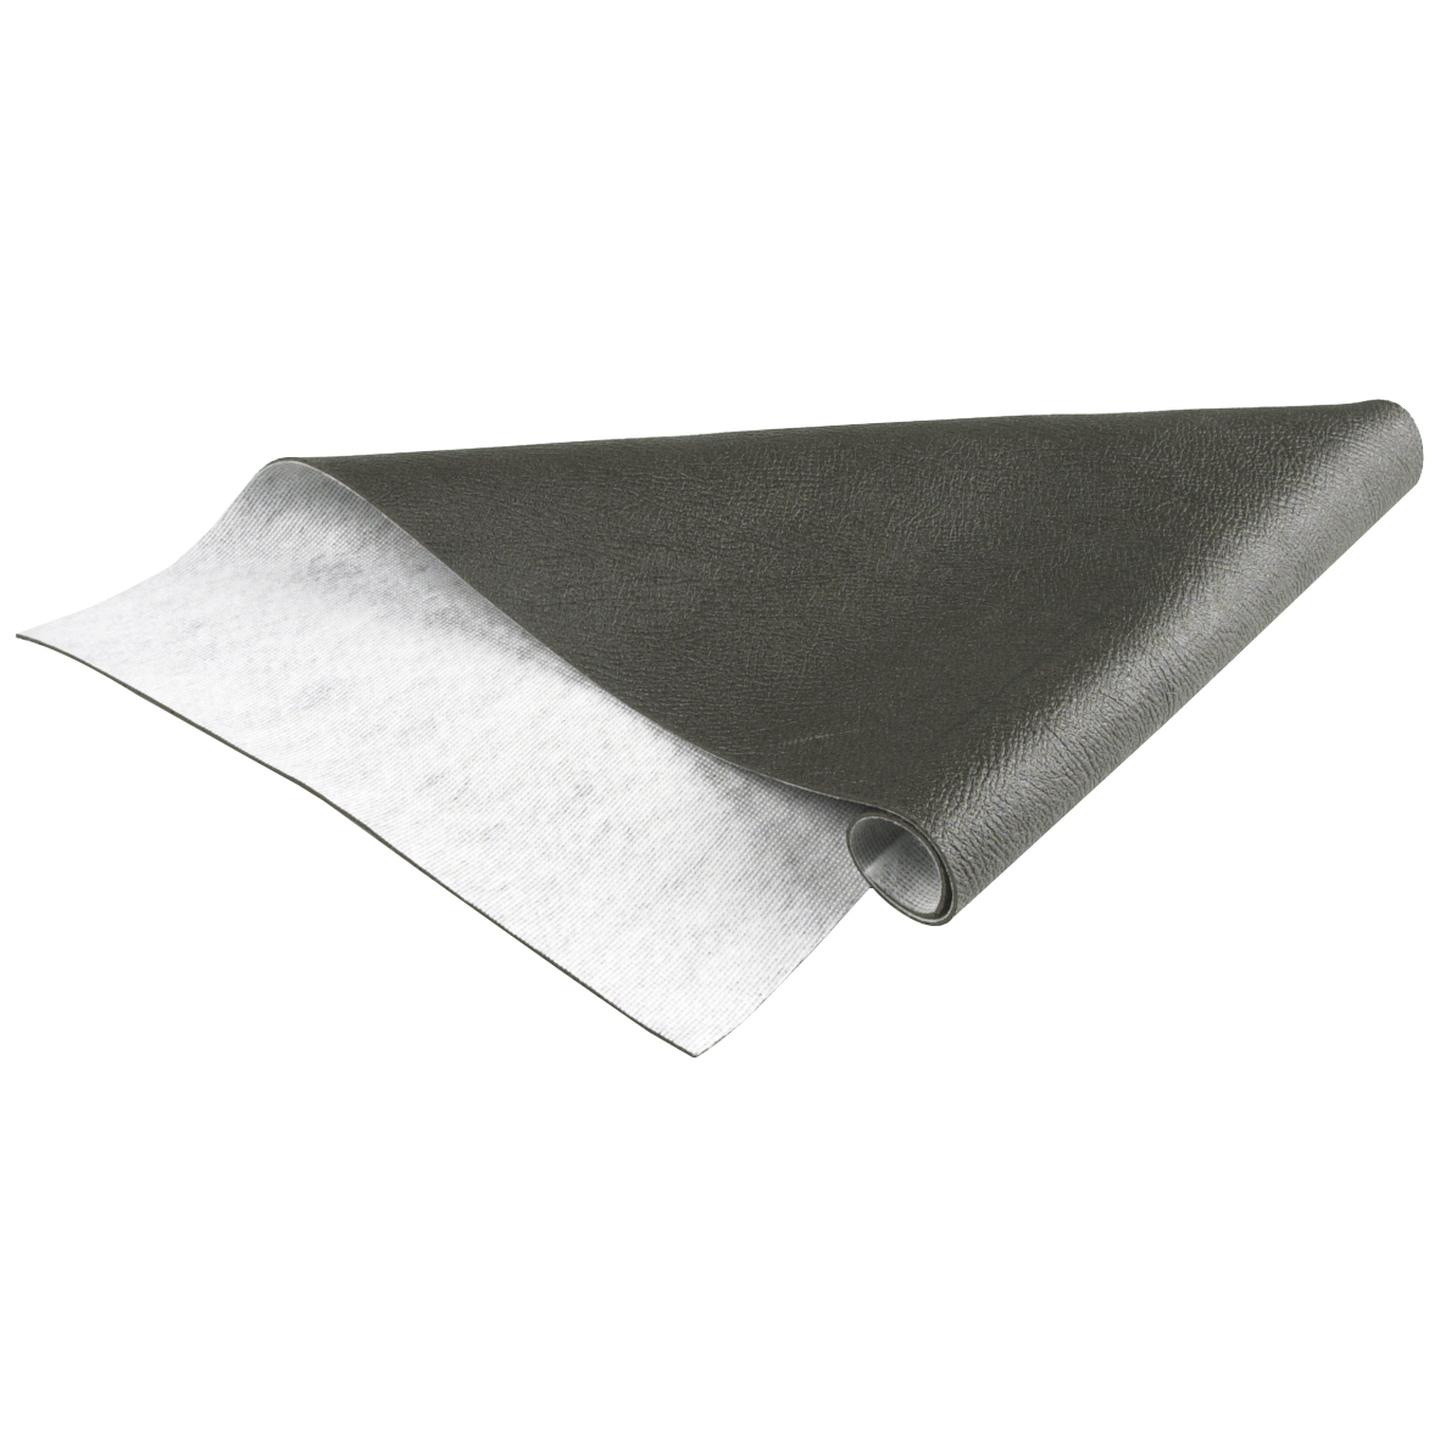 Heavy Duty Sound Barrier Damping Material - Improved